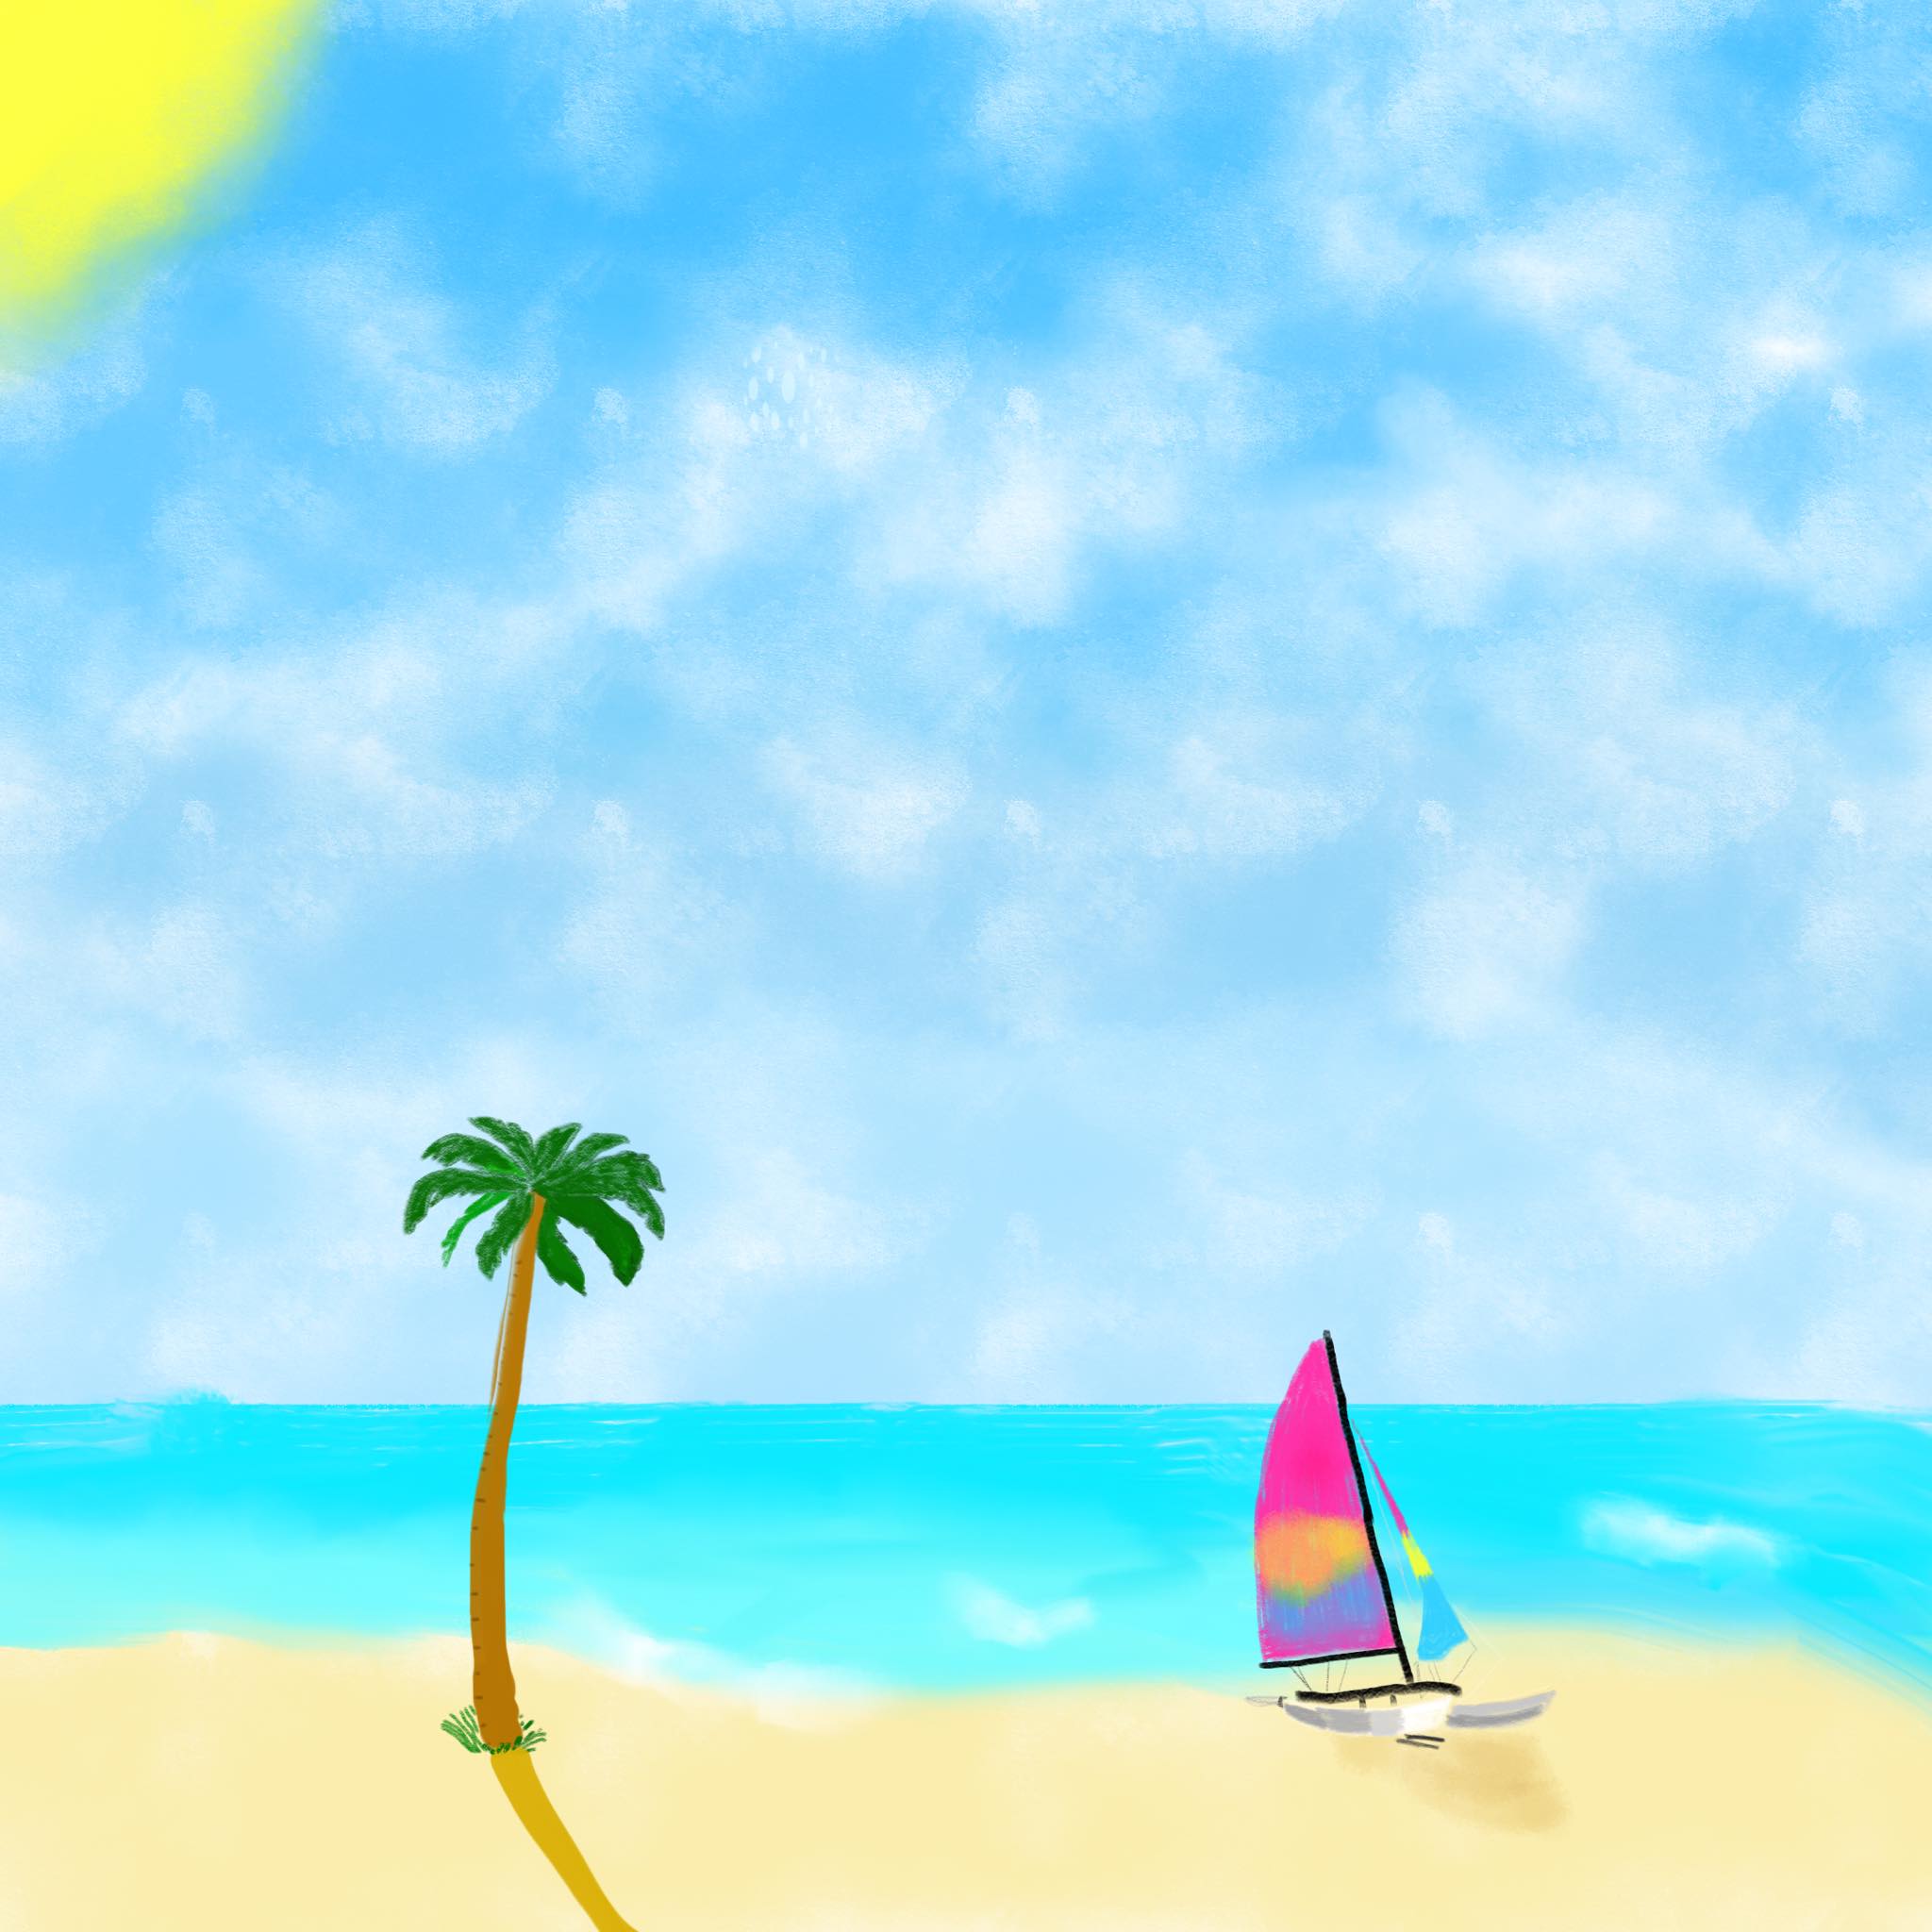 island time, sailboat and palm tree under a hot sun